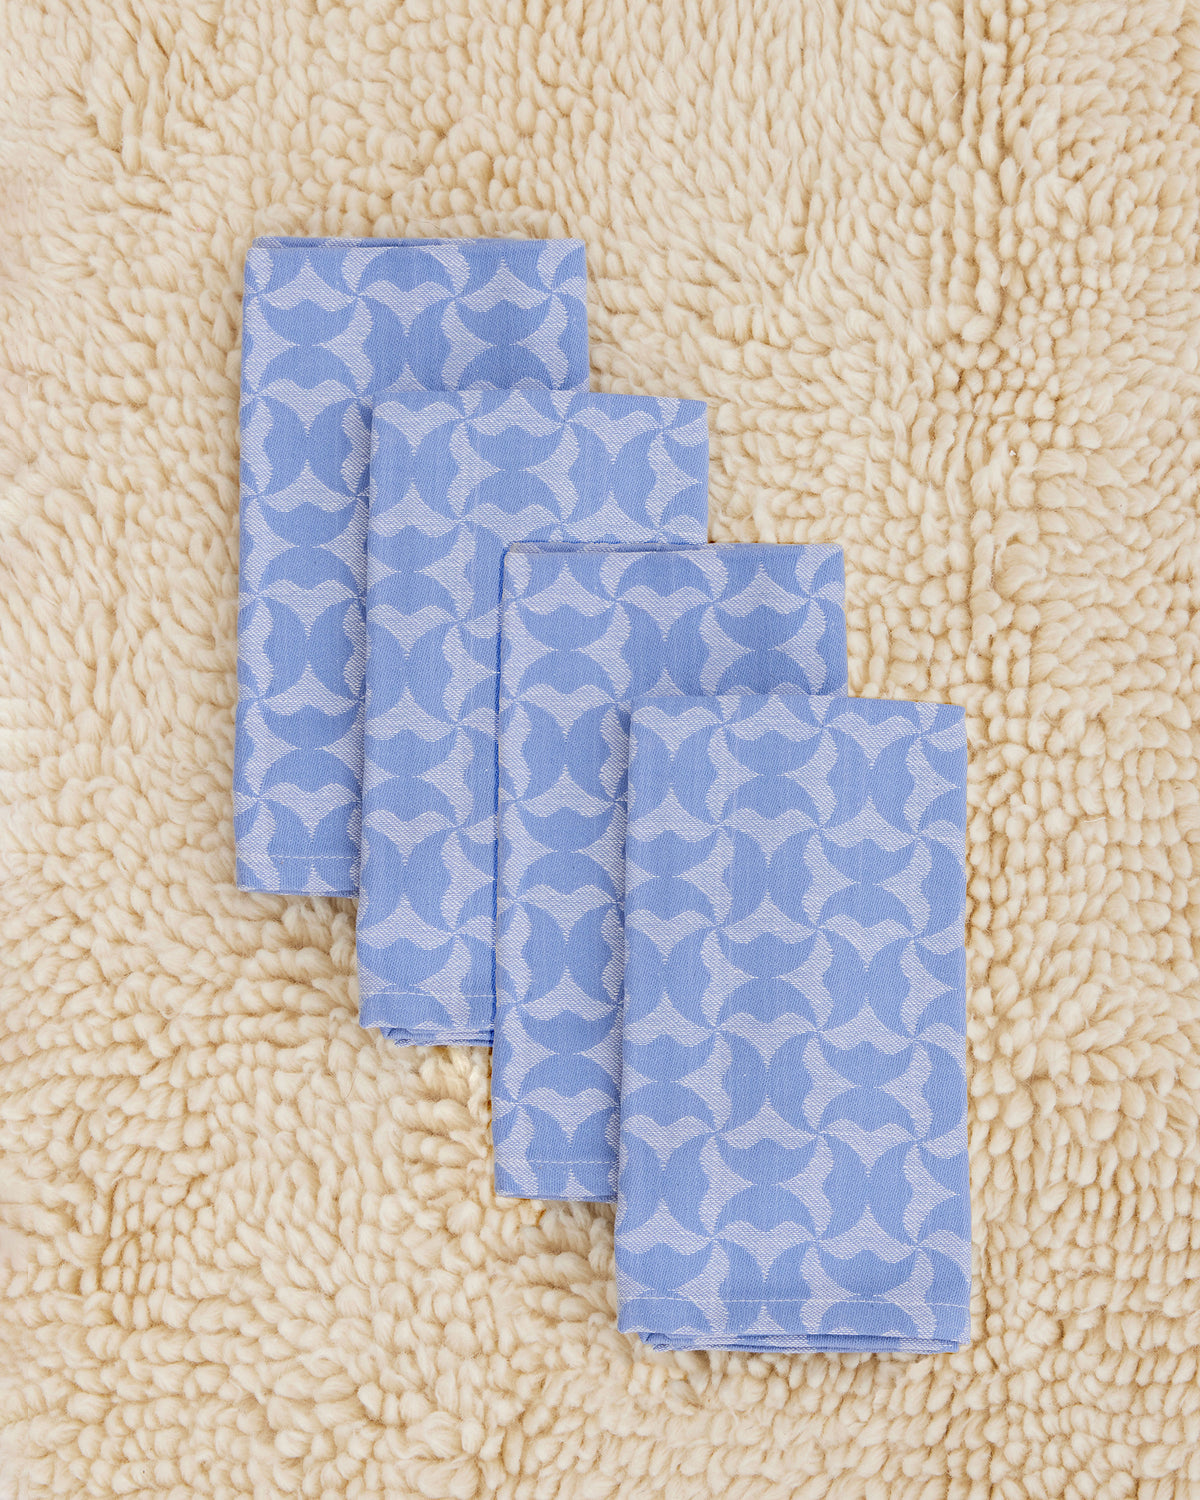 Dusen Dusen blue Flip Pattern Napkins, Set of 4. 100% cotton, jacquard weave, 20"x20". Machine wash cold and tumble dry low. Iron as needed. Made in India.